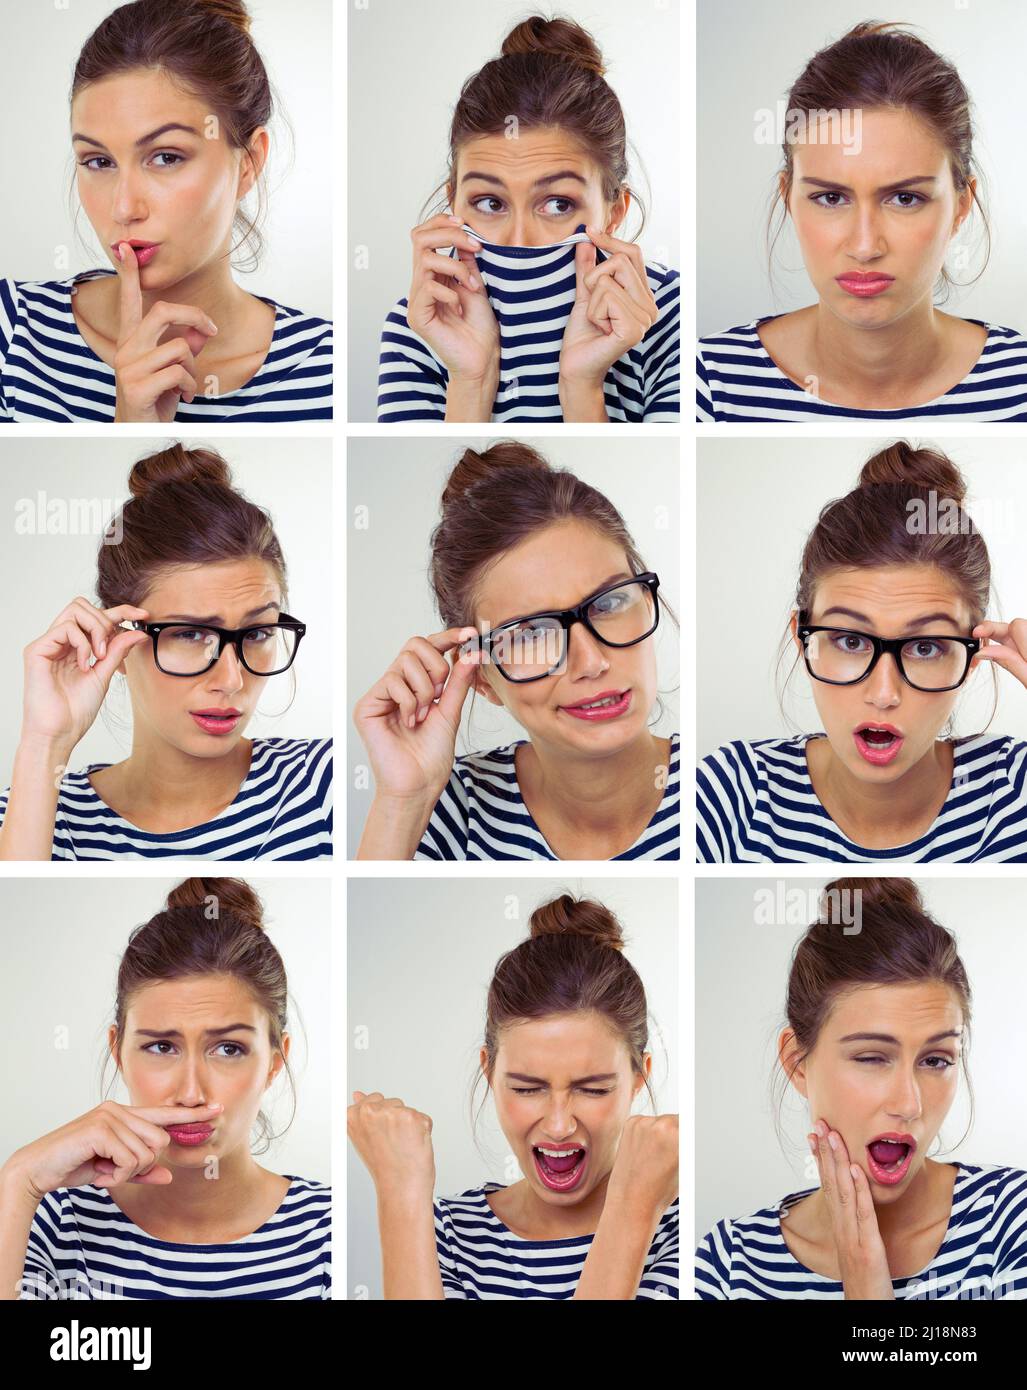 She a bundle of emotion. Multiple images of a beautiful young woman in varying poses. Stock Photo